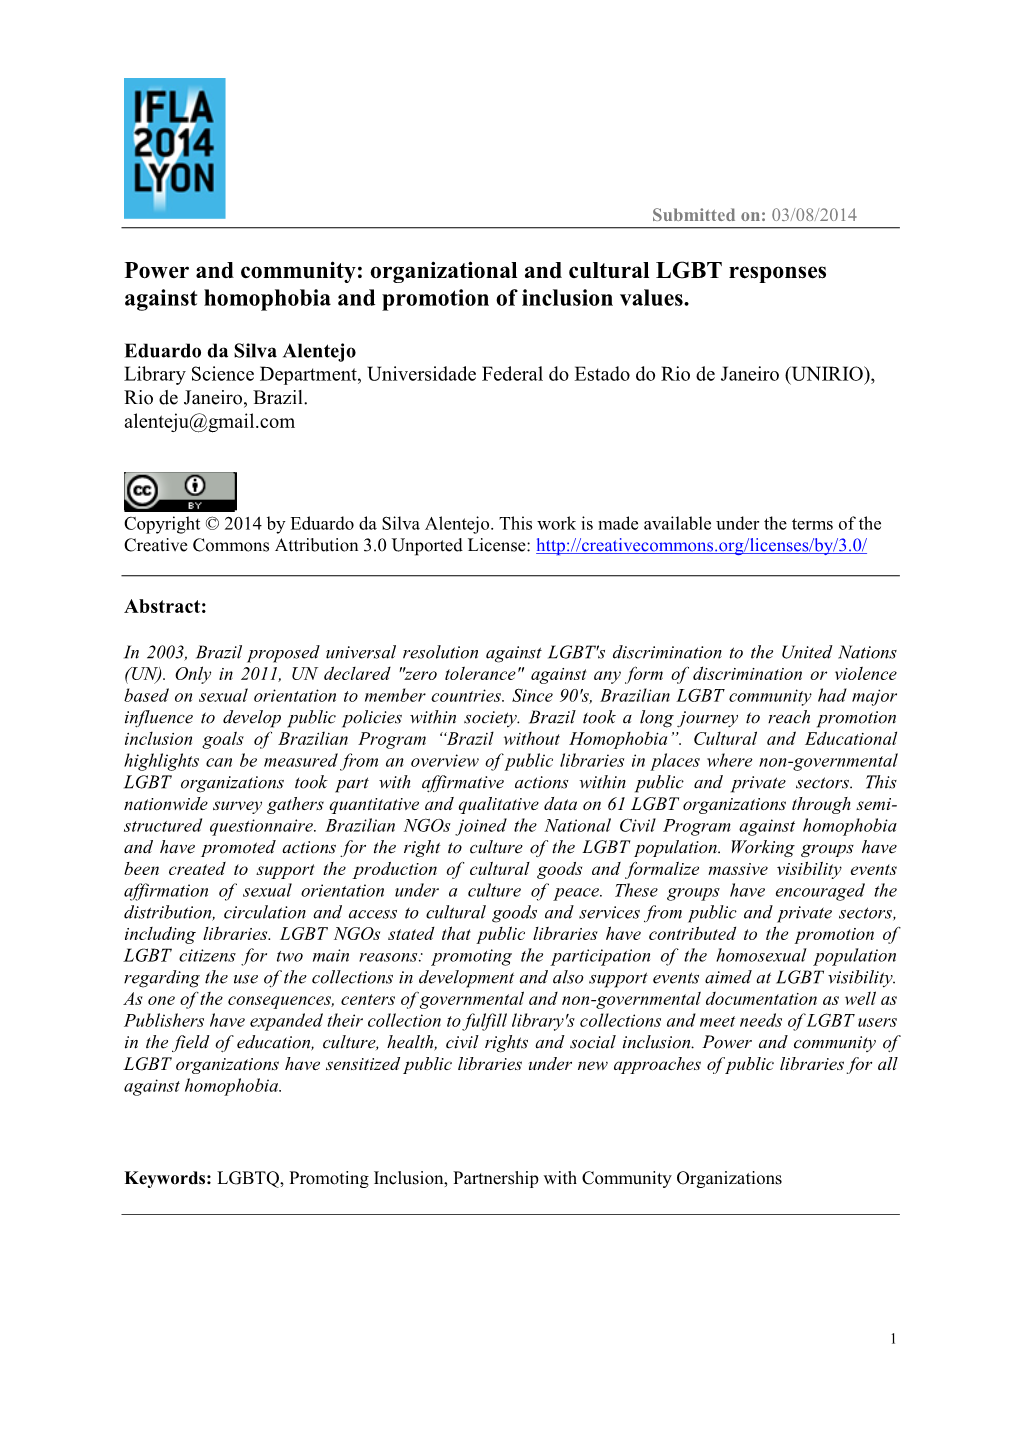 Organizational and Cultural LGBT Responses Against Homophobia and Promotion of Inclusion Values